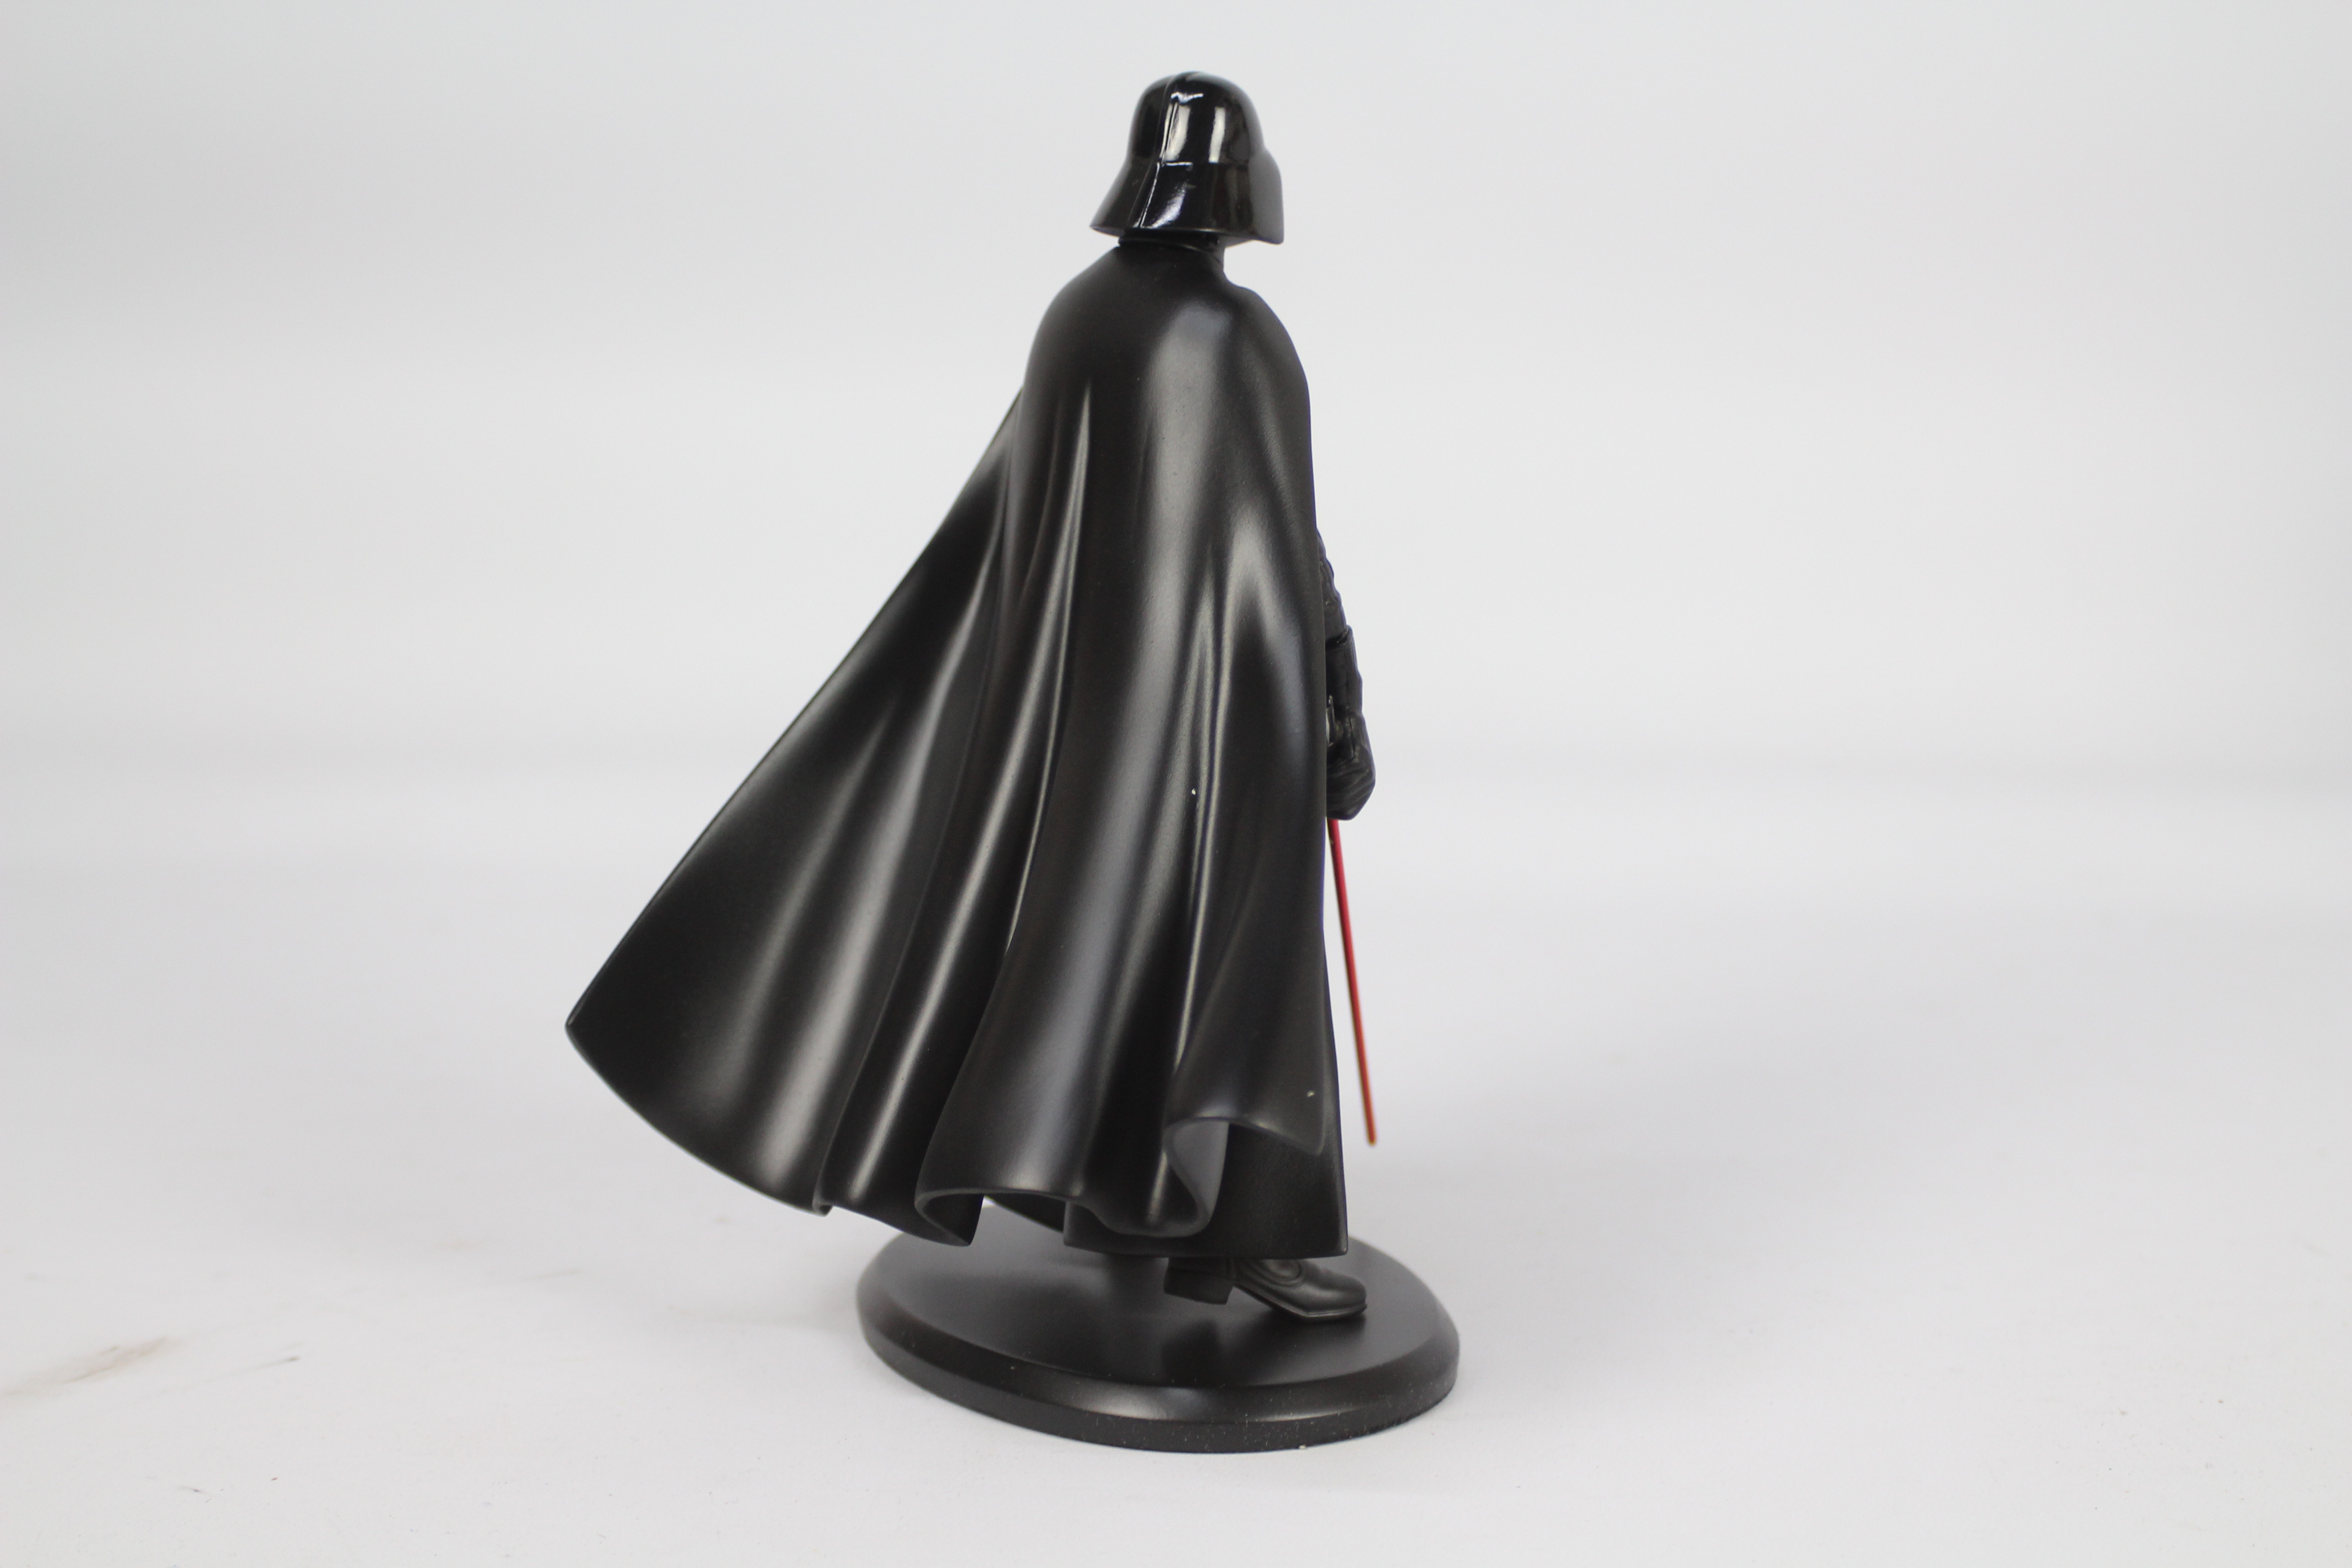 STAR WARS Darth Vader figure by ATTAKUS for De Agostini. Limited Edition #6713. 23cm high. - Image 5 of 8